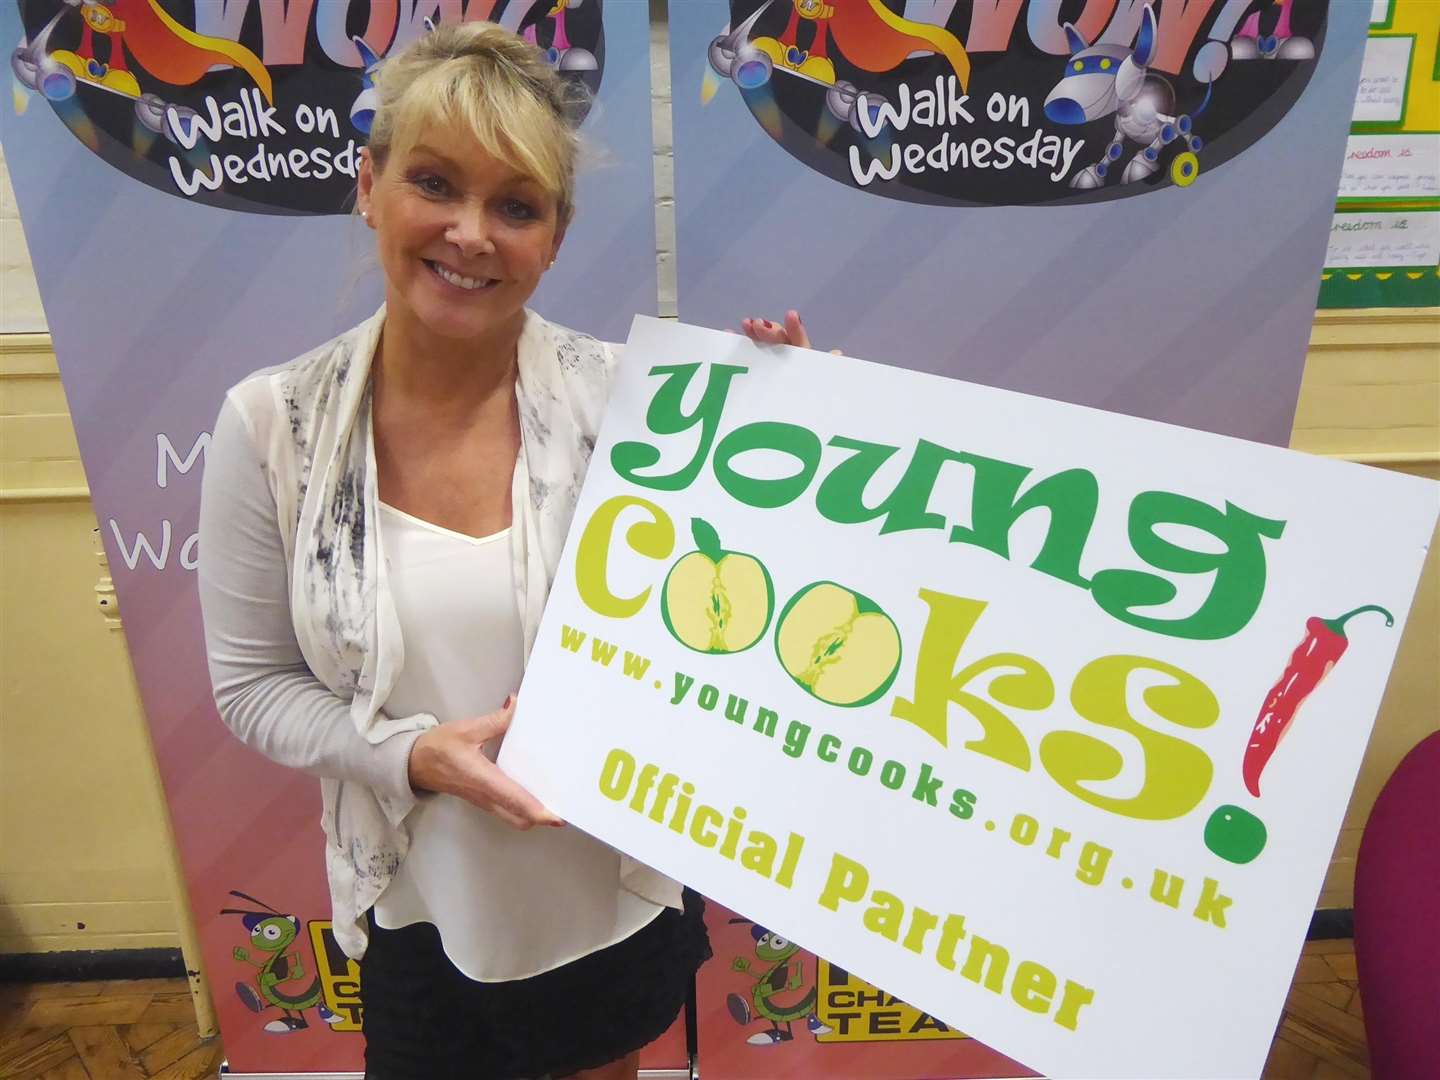 Cheryl Baker supports the Young Cooks contest for schools and families.